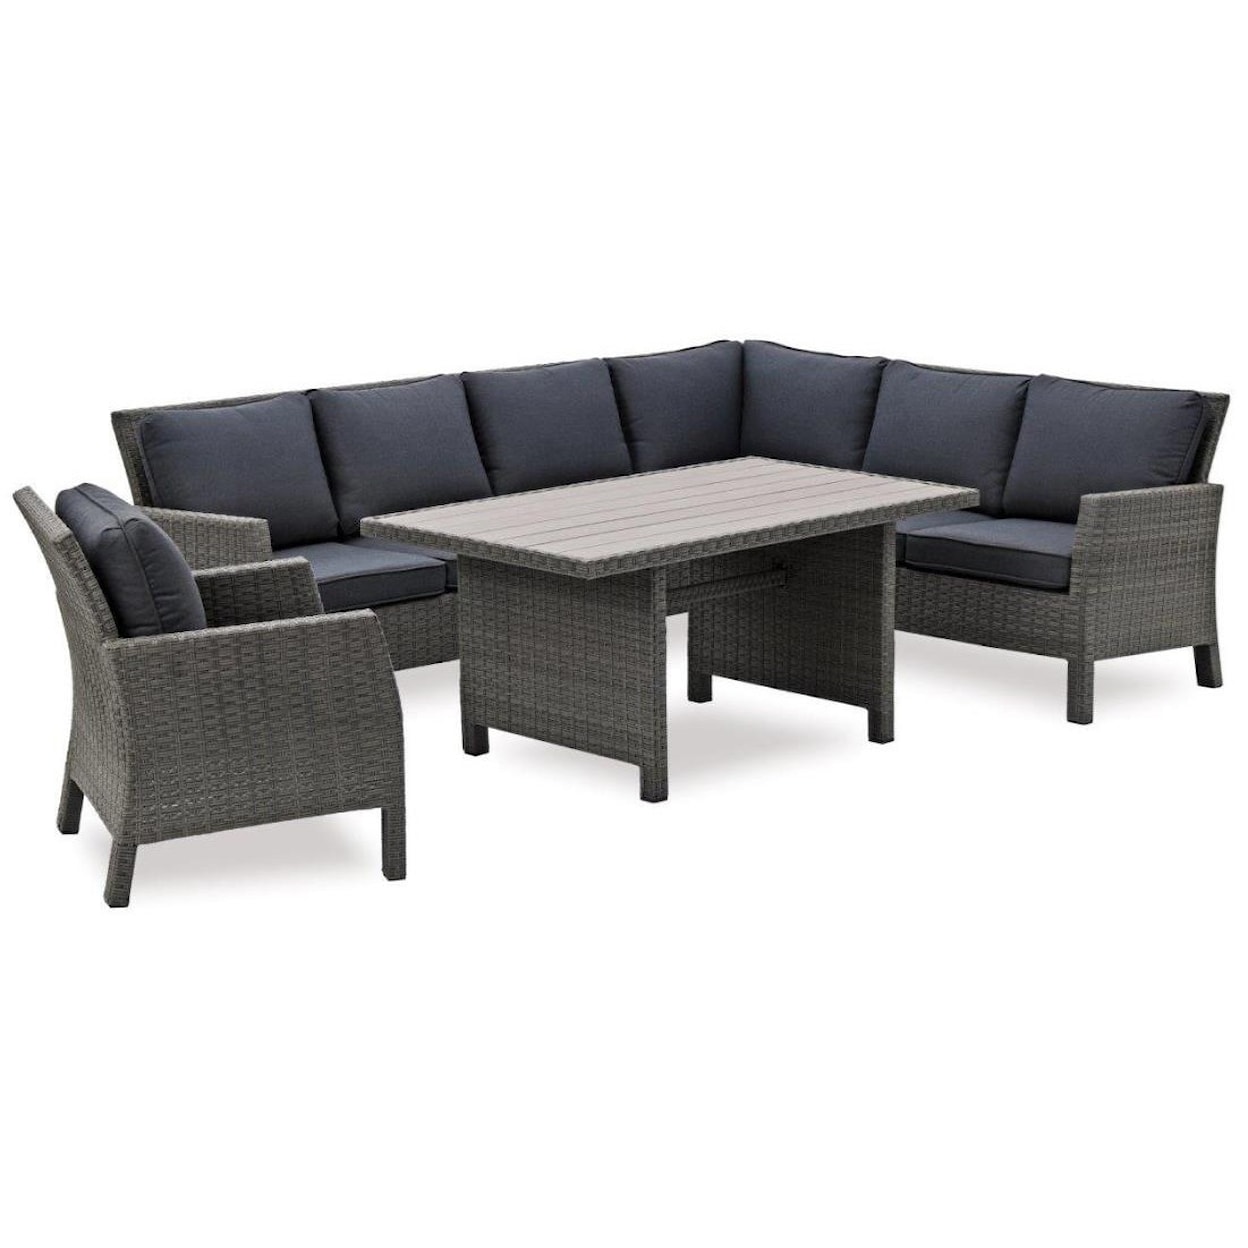 Primo International Arcadia Outdoor Sectional, Chair, and Table Set